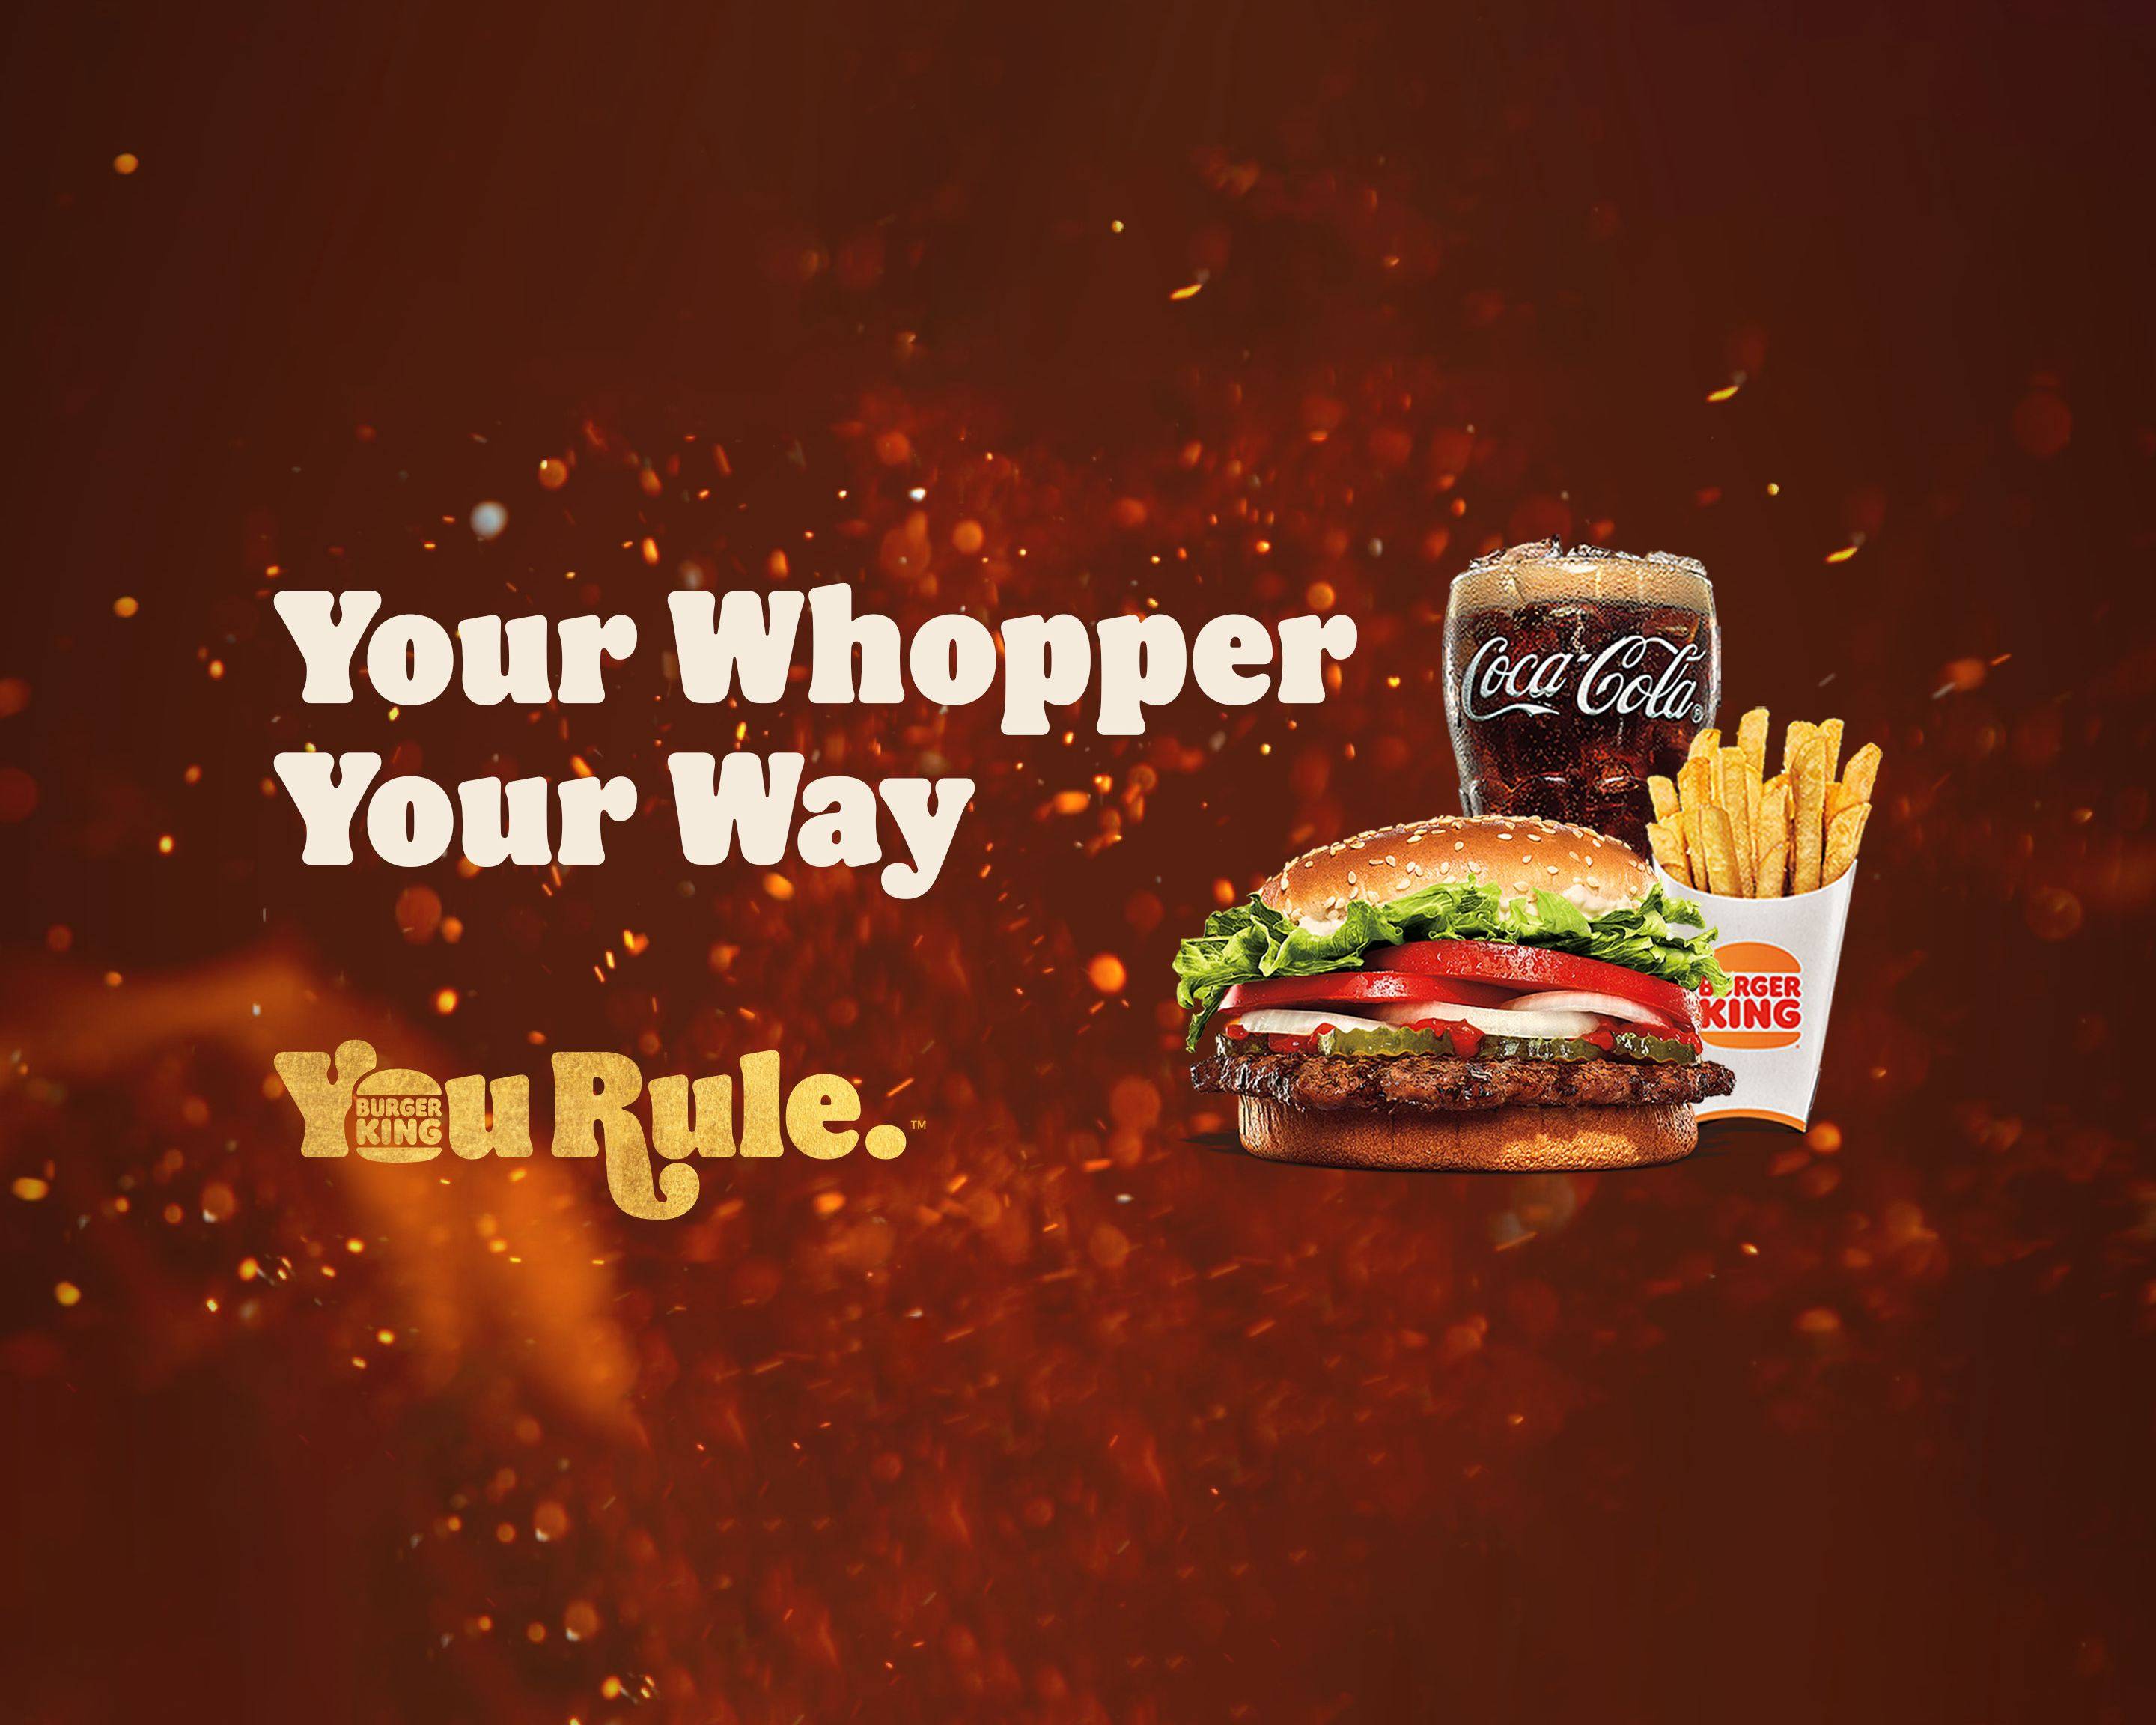 Burger King Whopper Is Returning to Its Original Price - Here's